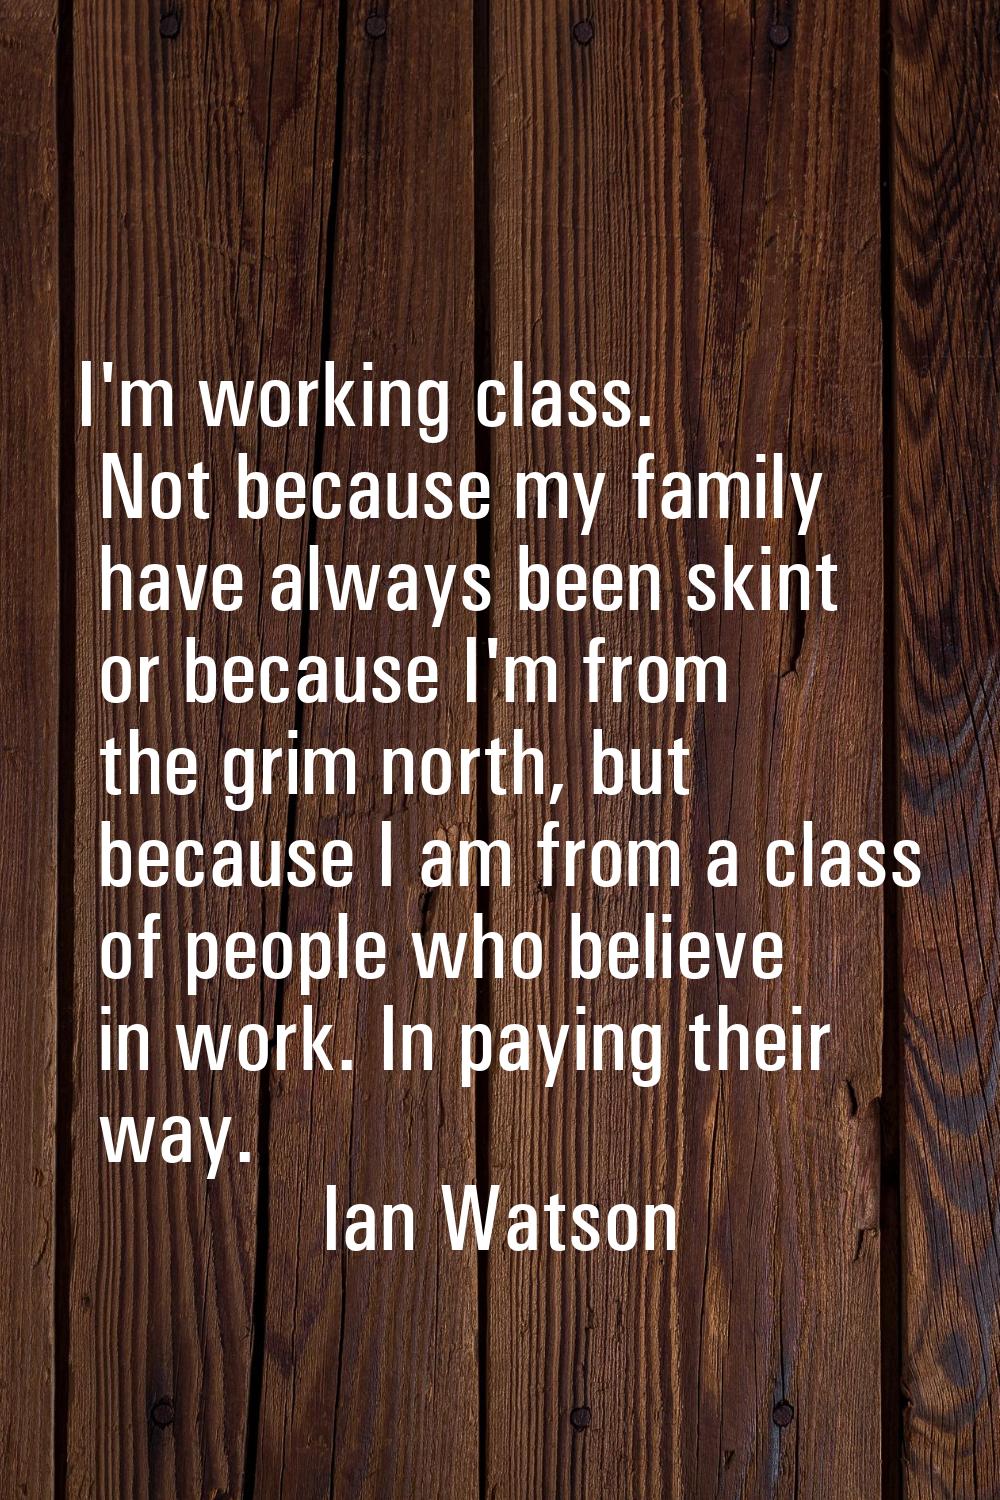 I'm working class. Not because my family have always been skint or because I'm from the grim north,